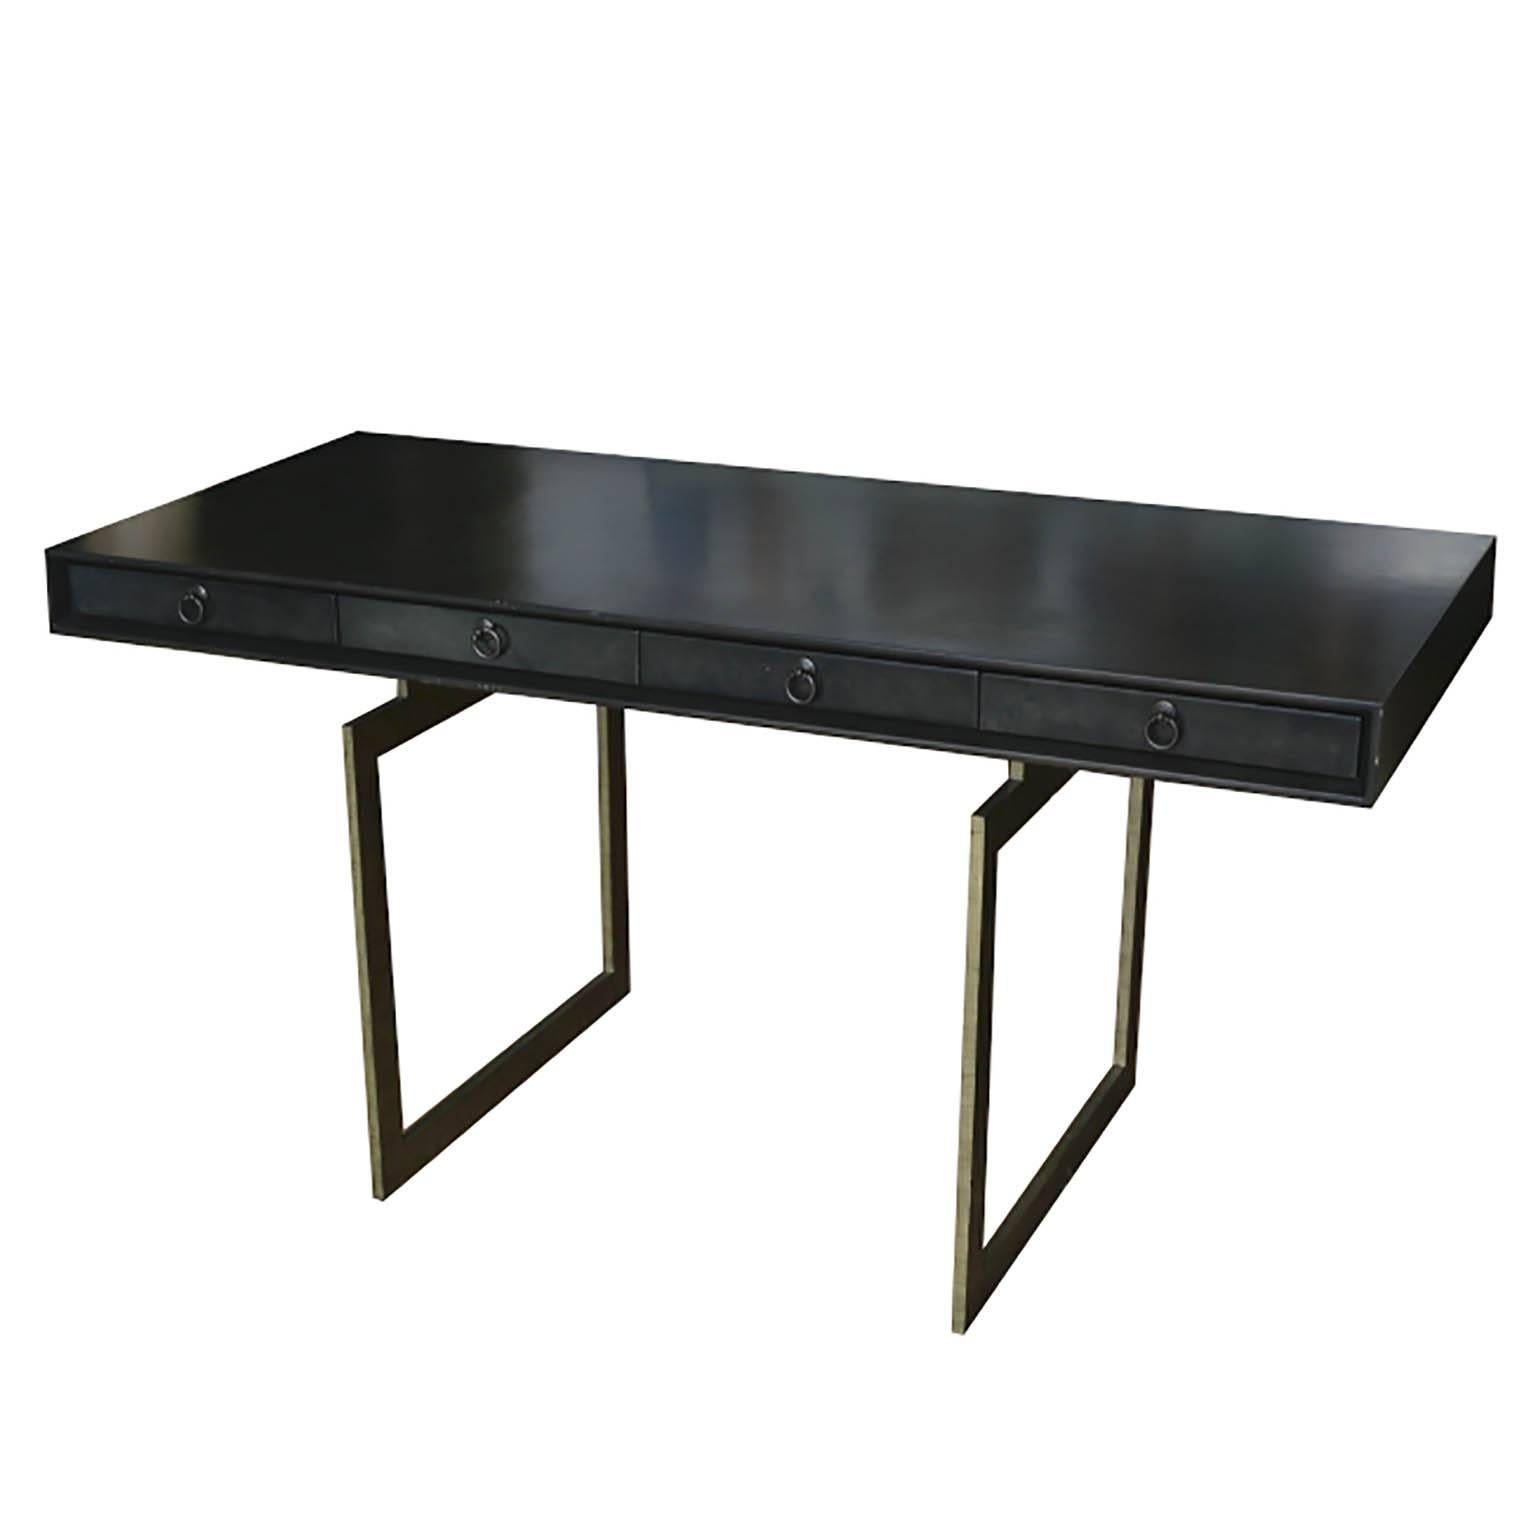 A stylish desk that appears elegant and simple, but offers enough surface space for serious work. The desk is wrapped in black vellum cow hide with Hickory lined drawers and brass pulls framed by a beveled detail. The only ornamentation of an